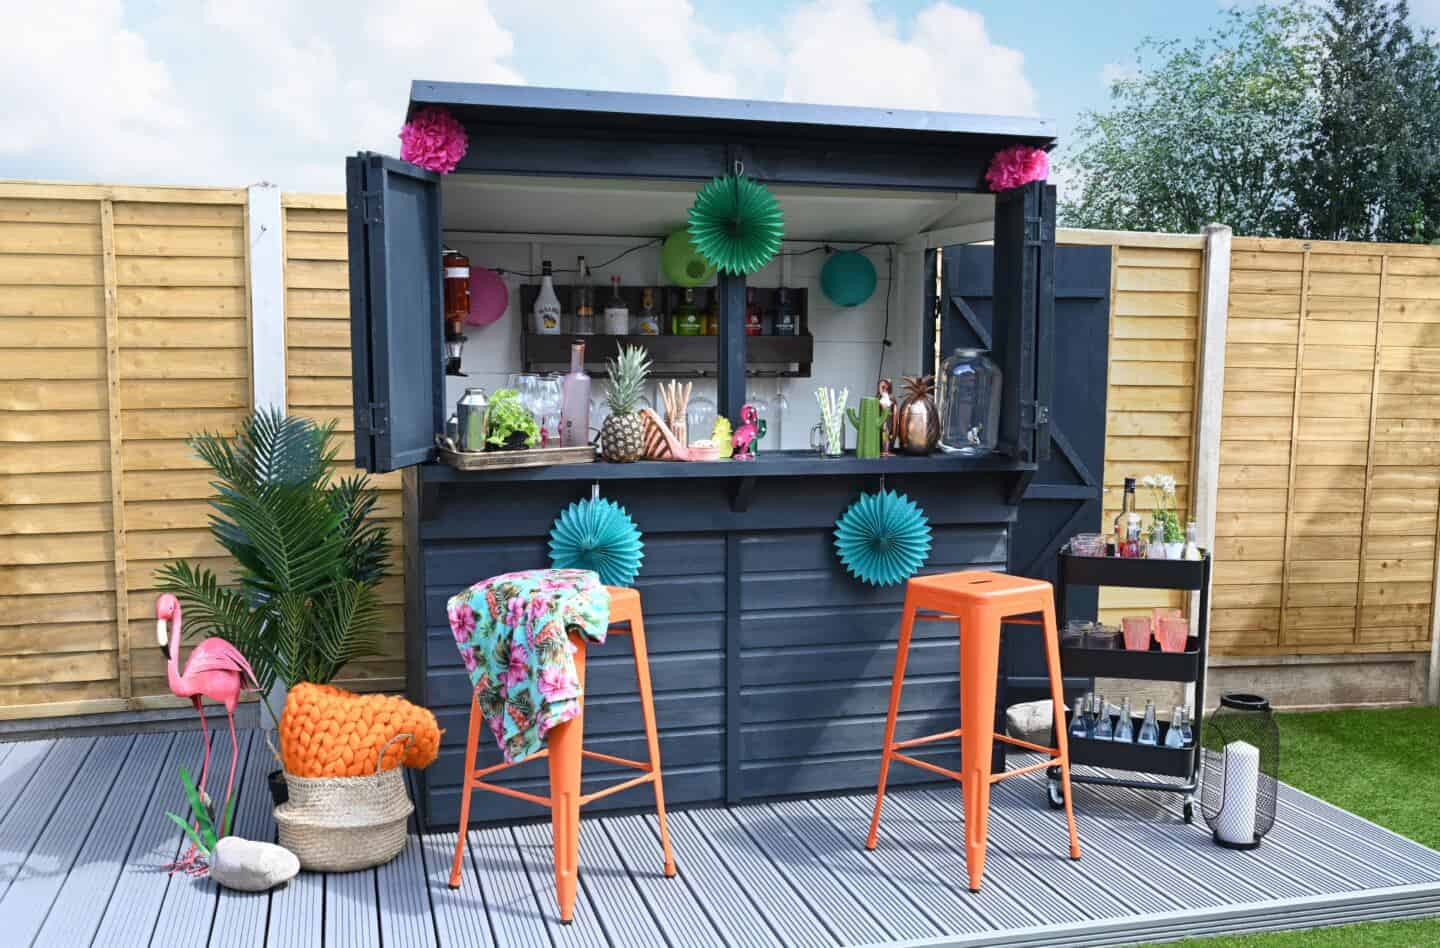 A garden shed painted black and used as a garden bar